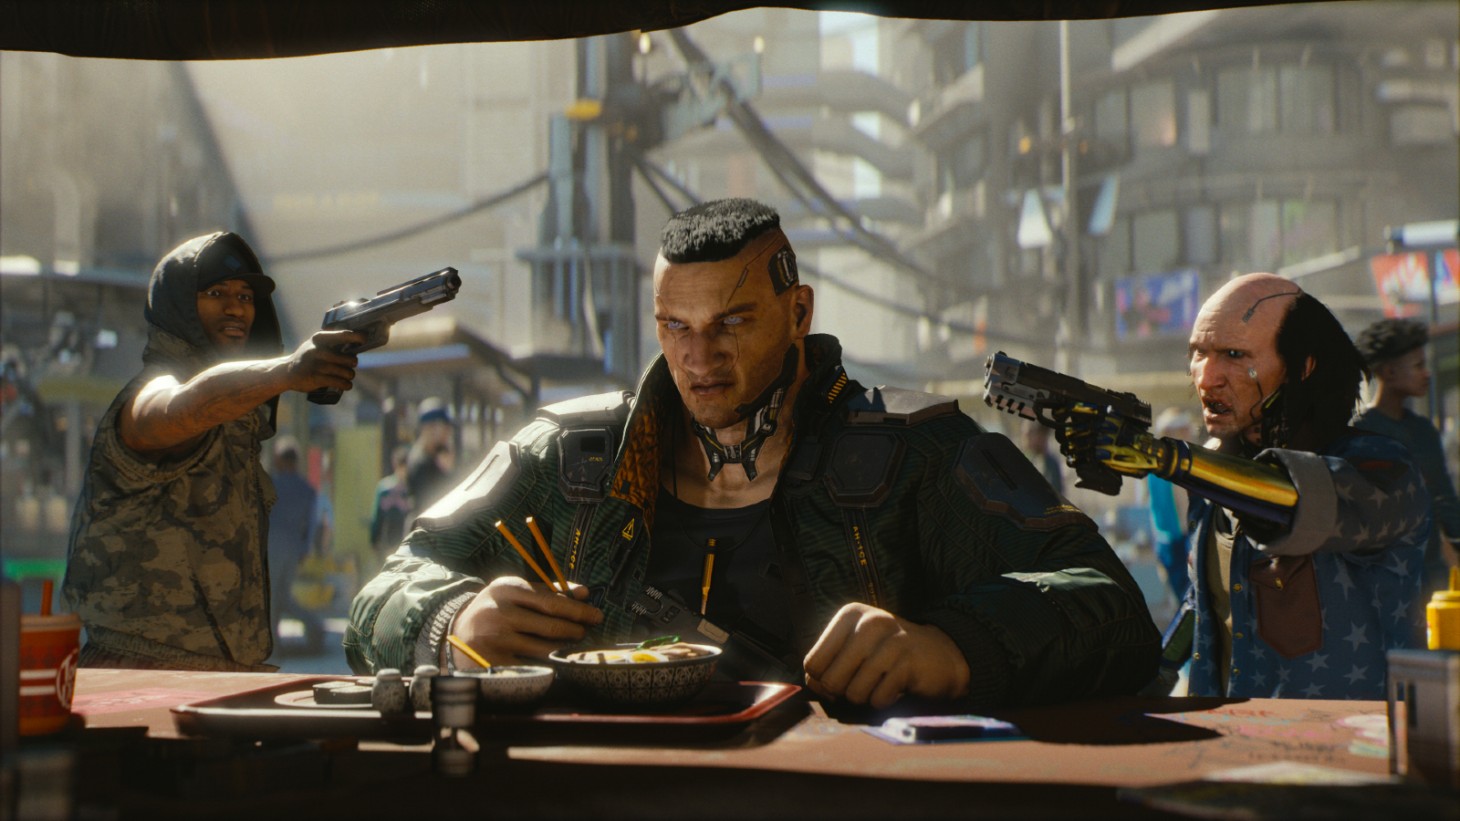 Cyberpunk 2077: CDPR Dev Says There’s Still More Work To Be Done, Reaffirms Expansions Are On The Way